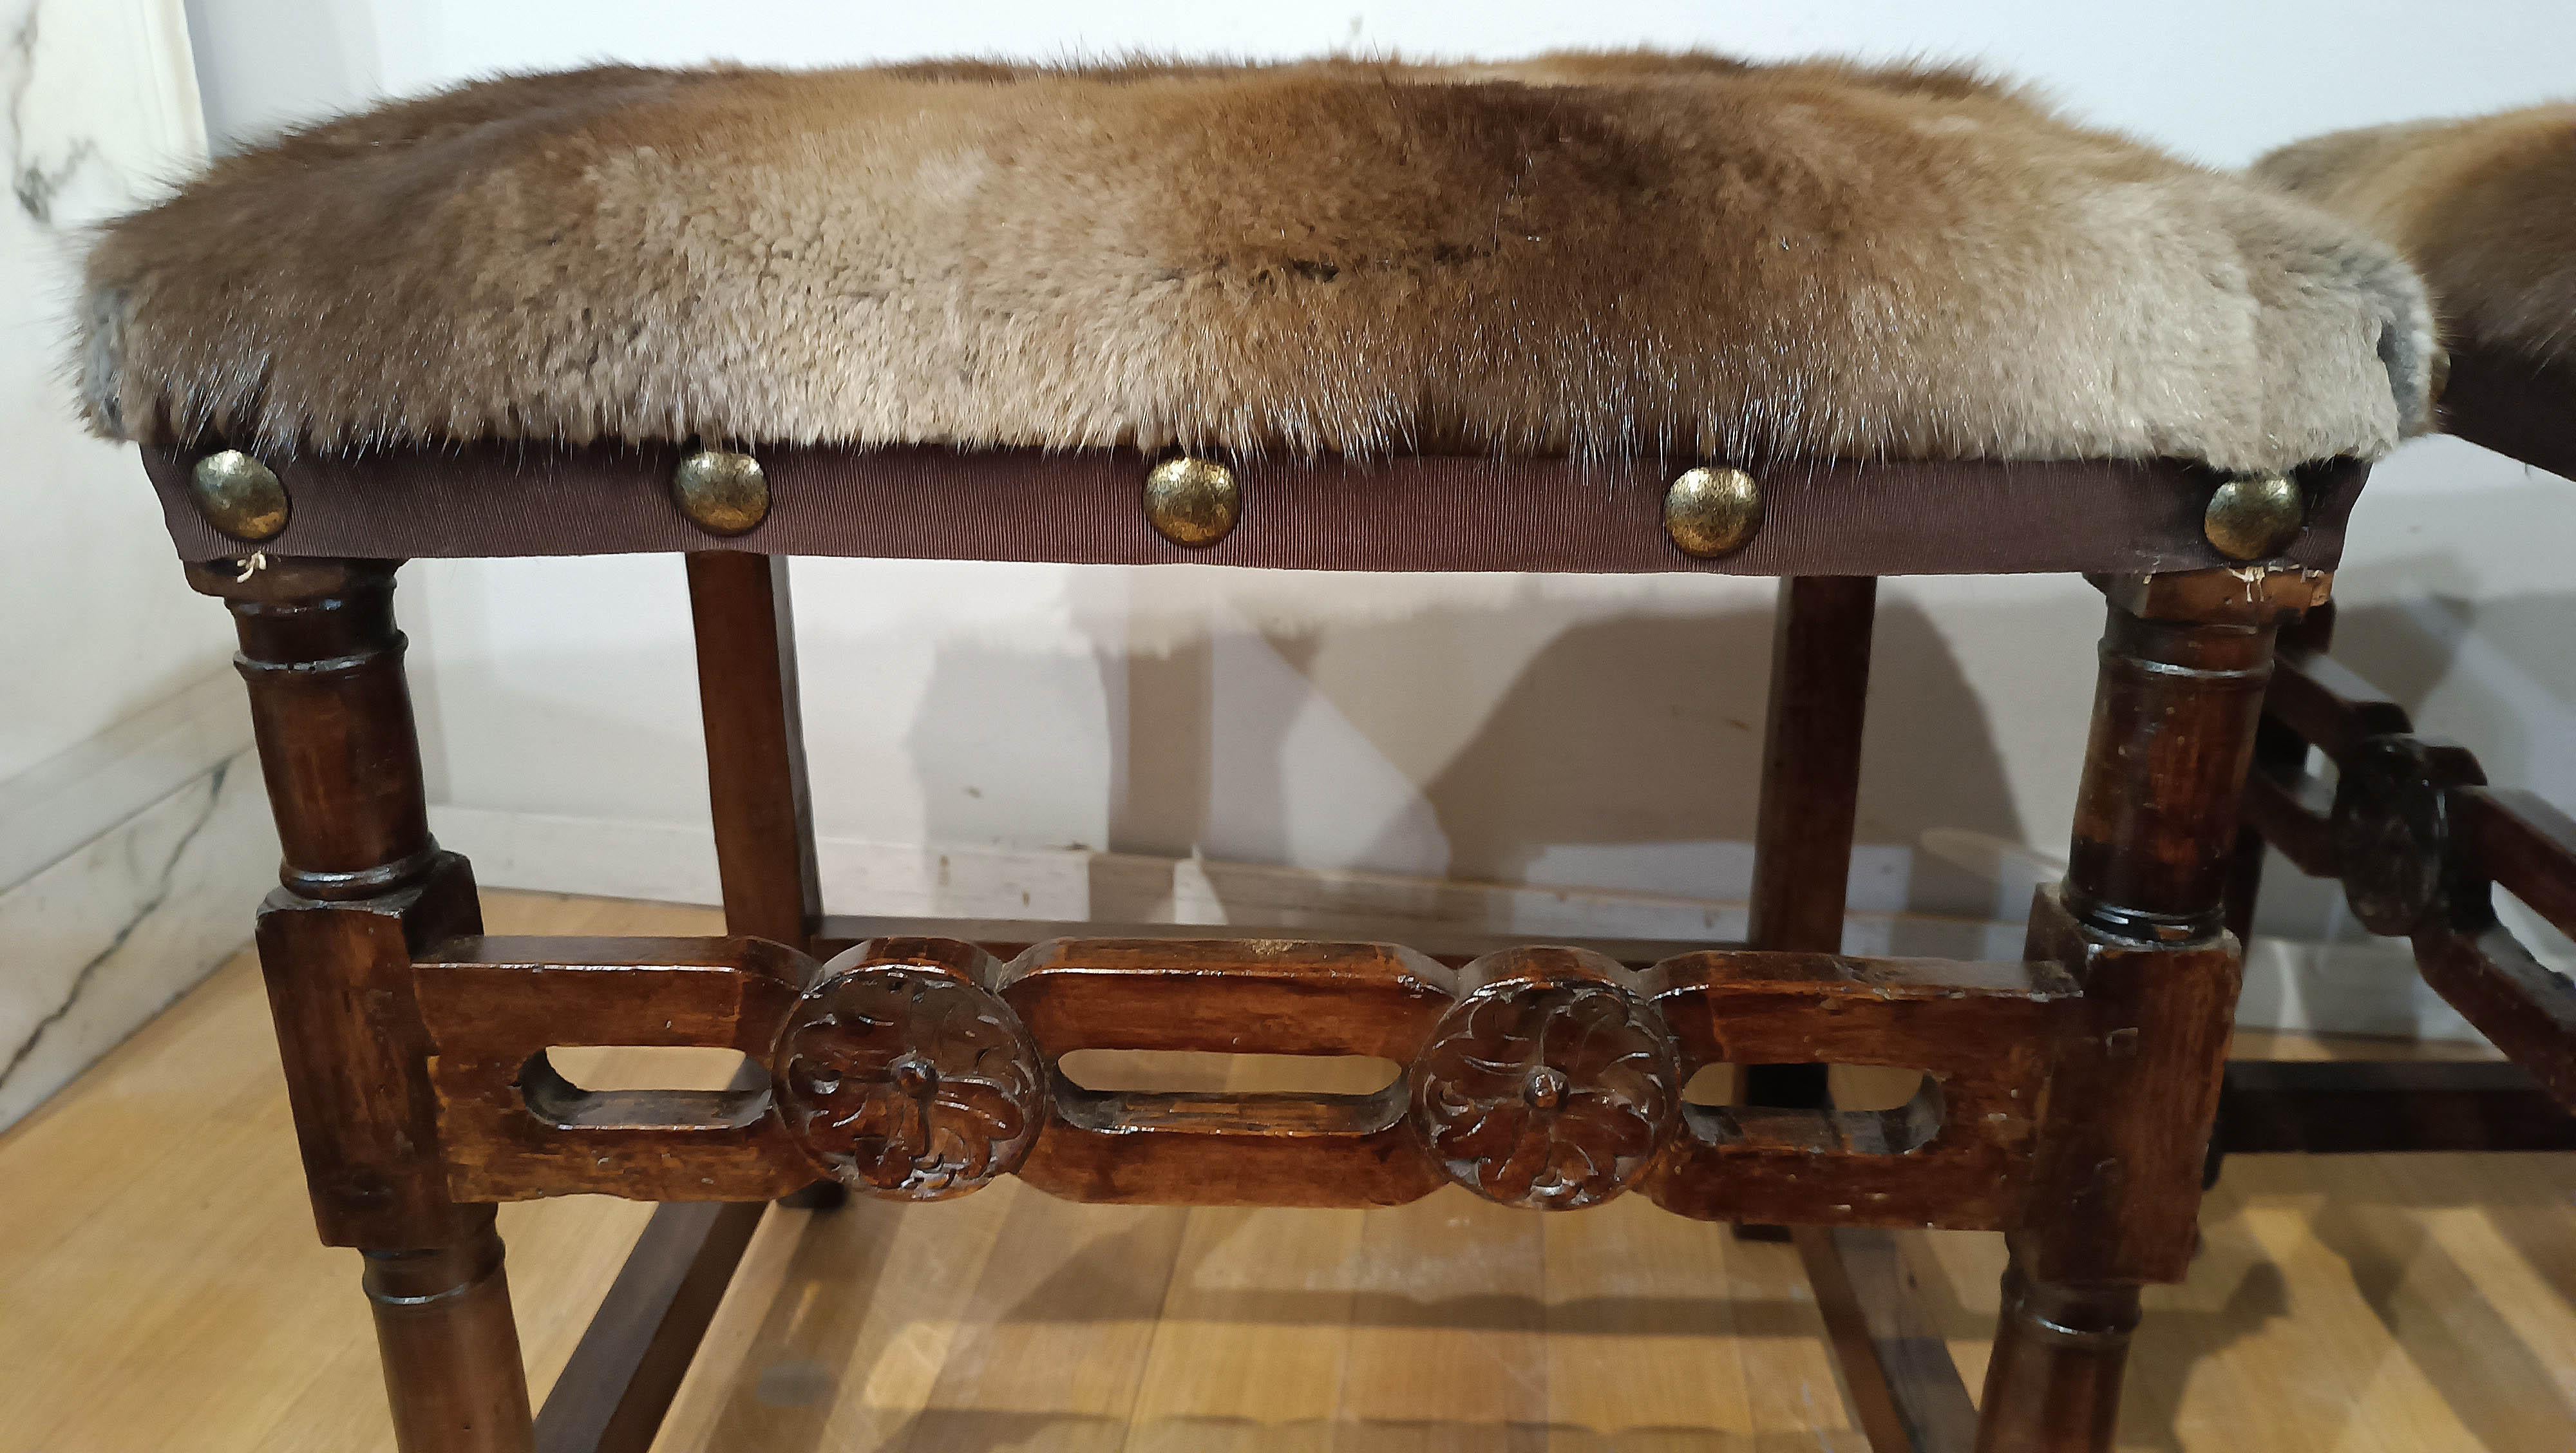 Animal Skin 16th CENTURY RENAISSANCE STOOLS IN MINK For Sale